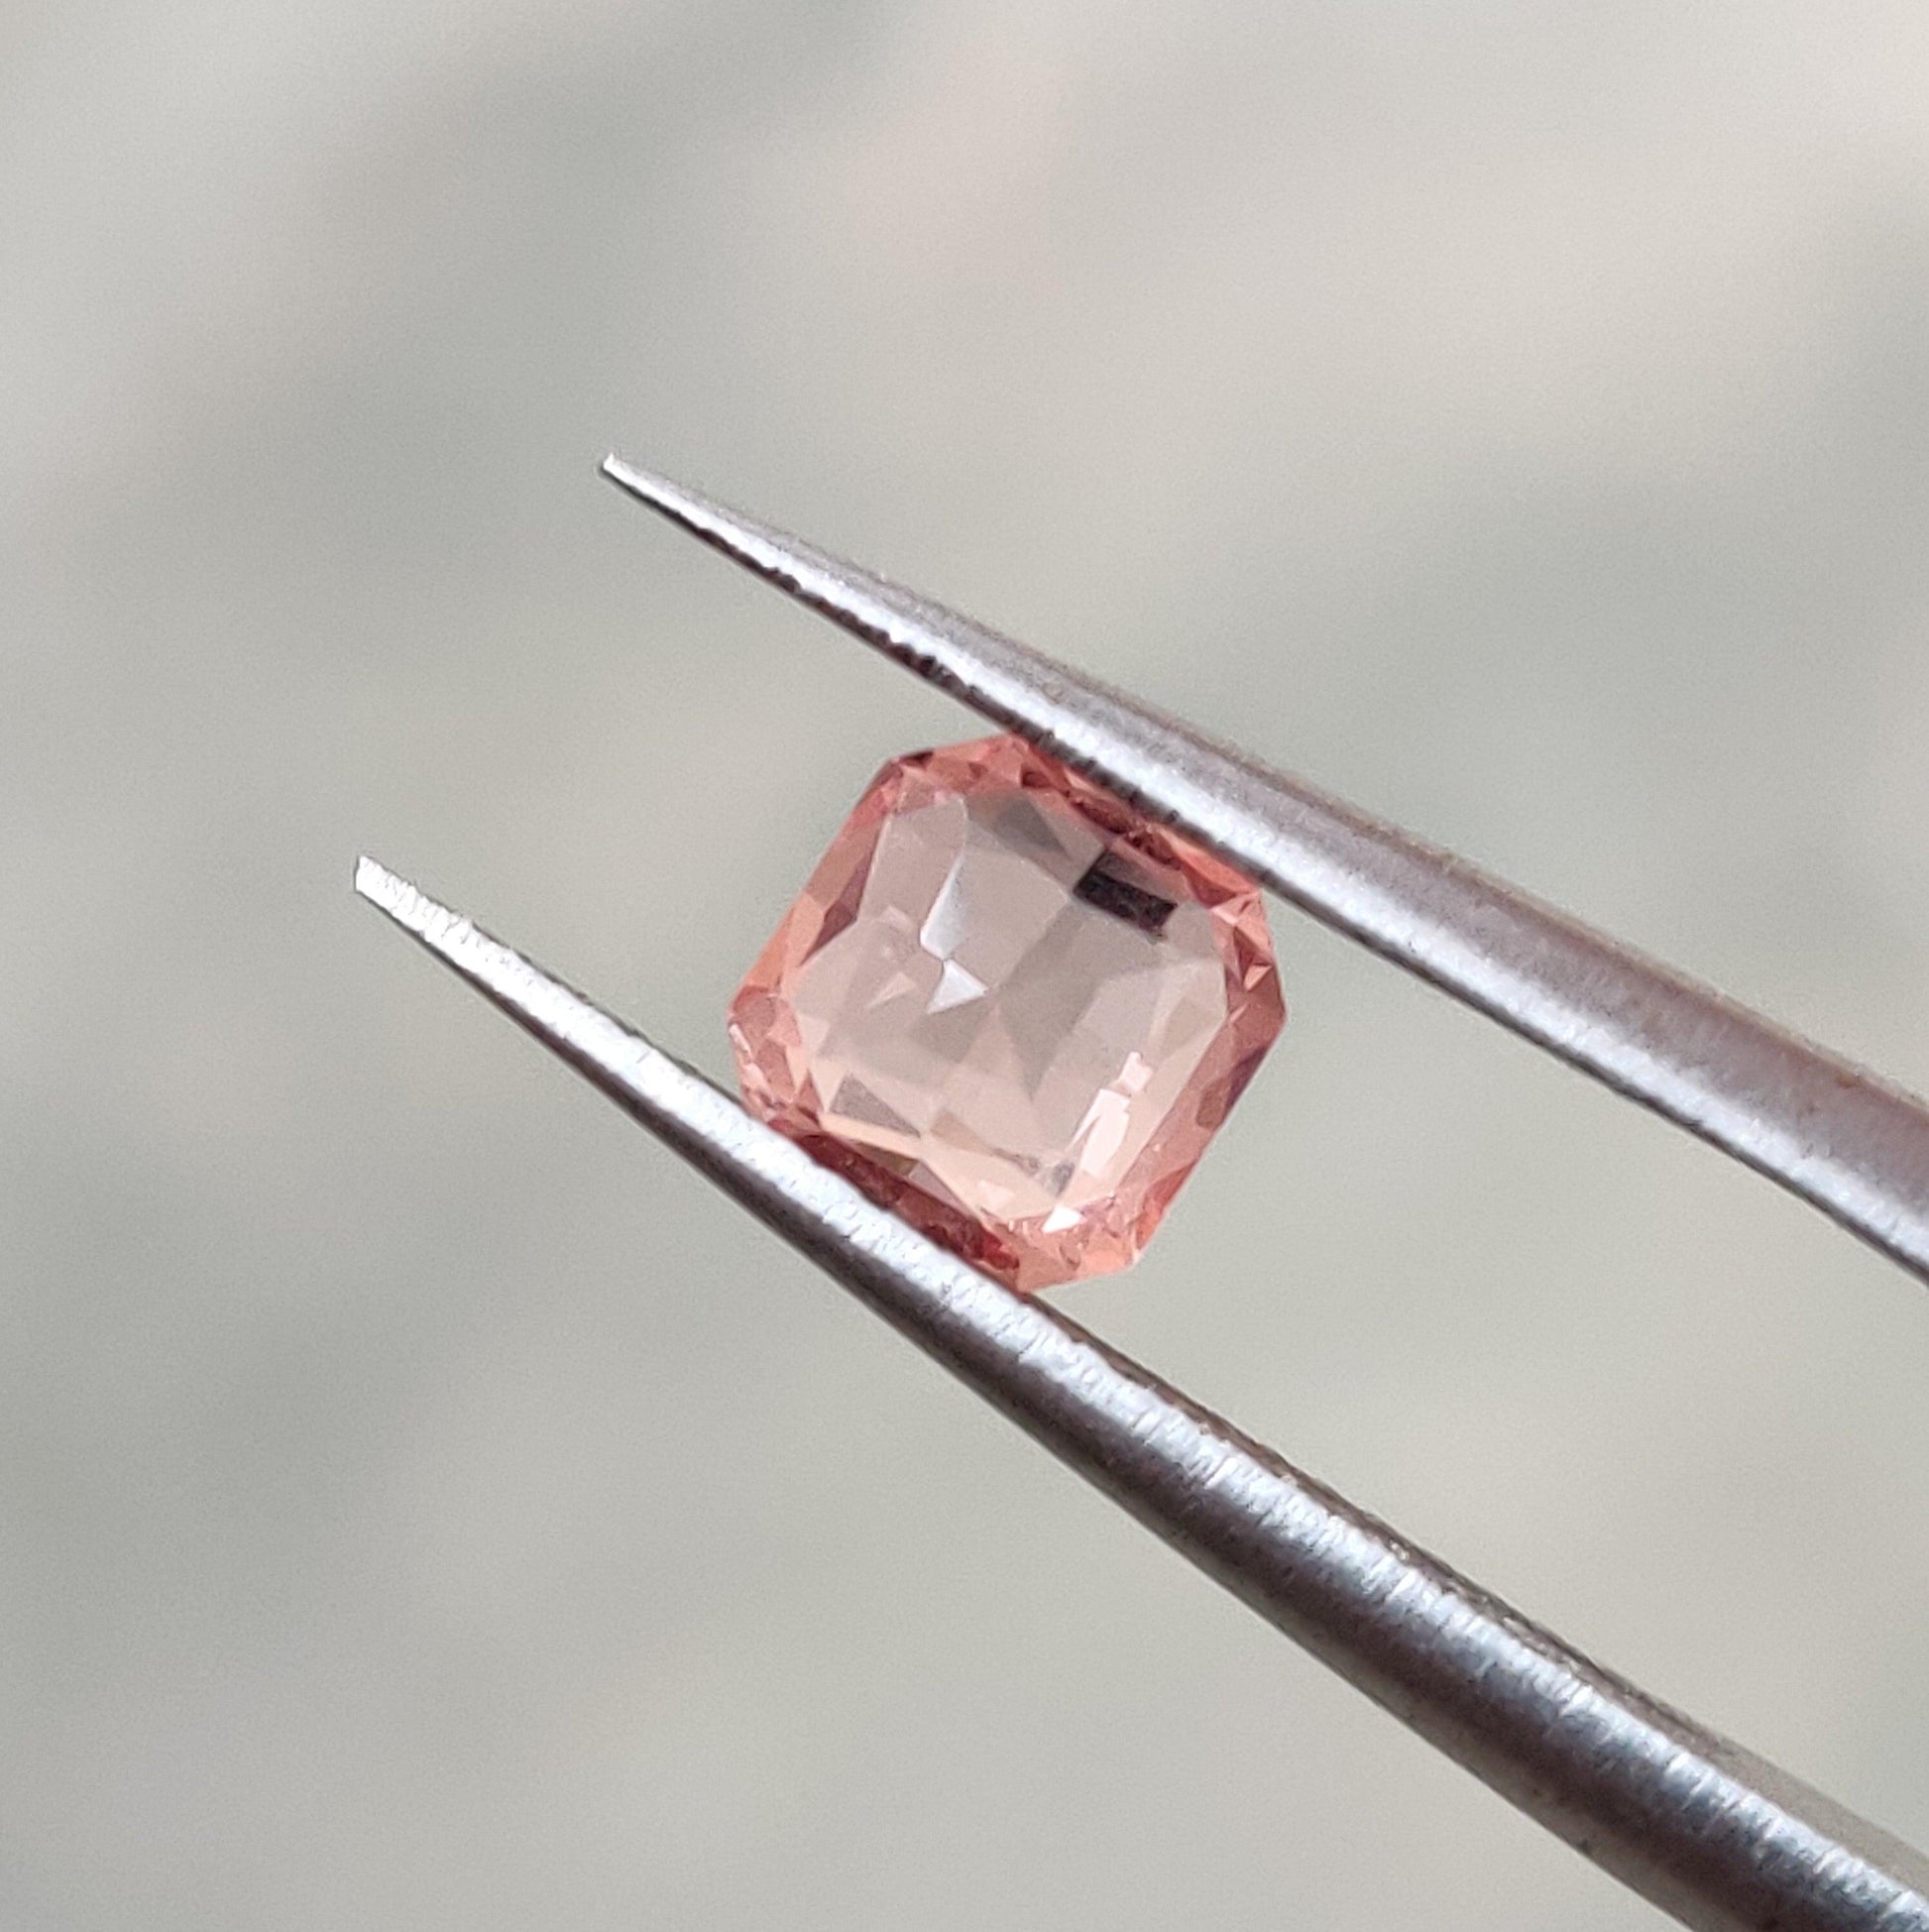 Padparadscha Sapphire Natural Heated 0.69ct